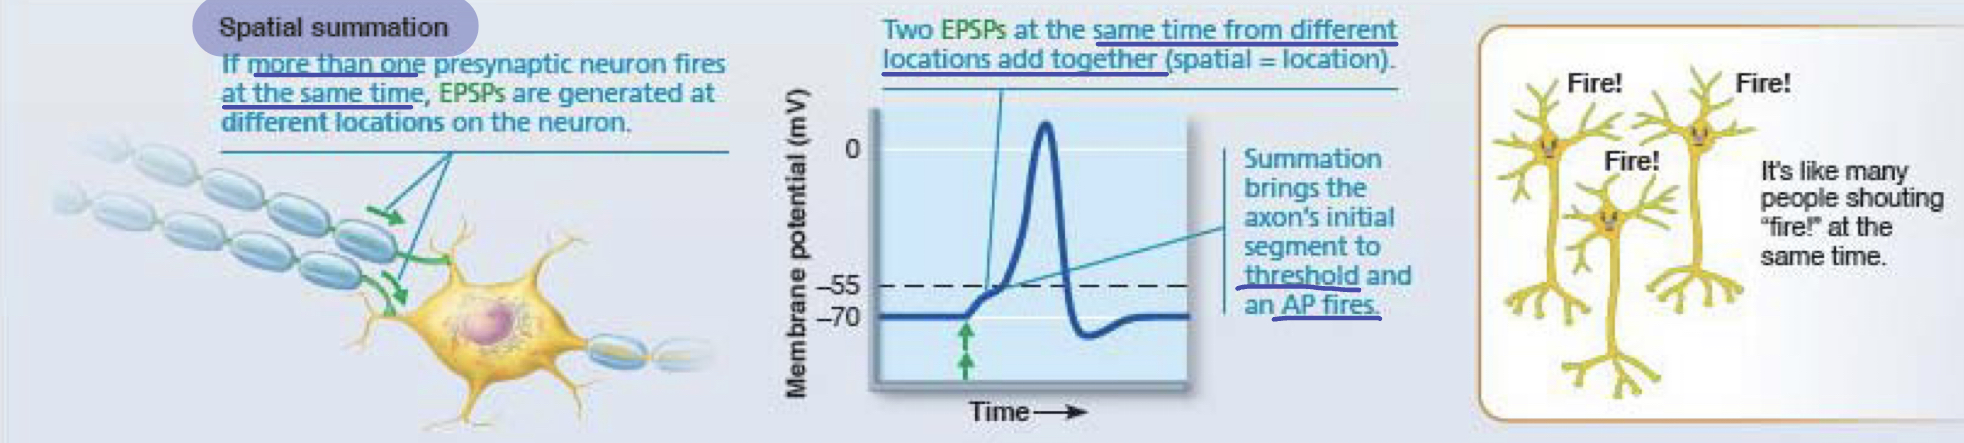 <p>more than one presynaptic neuron fires at the same time --&gt; EPSPs are generated at different locations of the neuron --&gt; add together/summation brings axon to threshold --&gt; neuron fires</p>